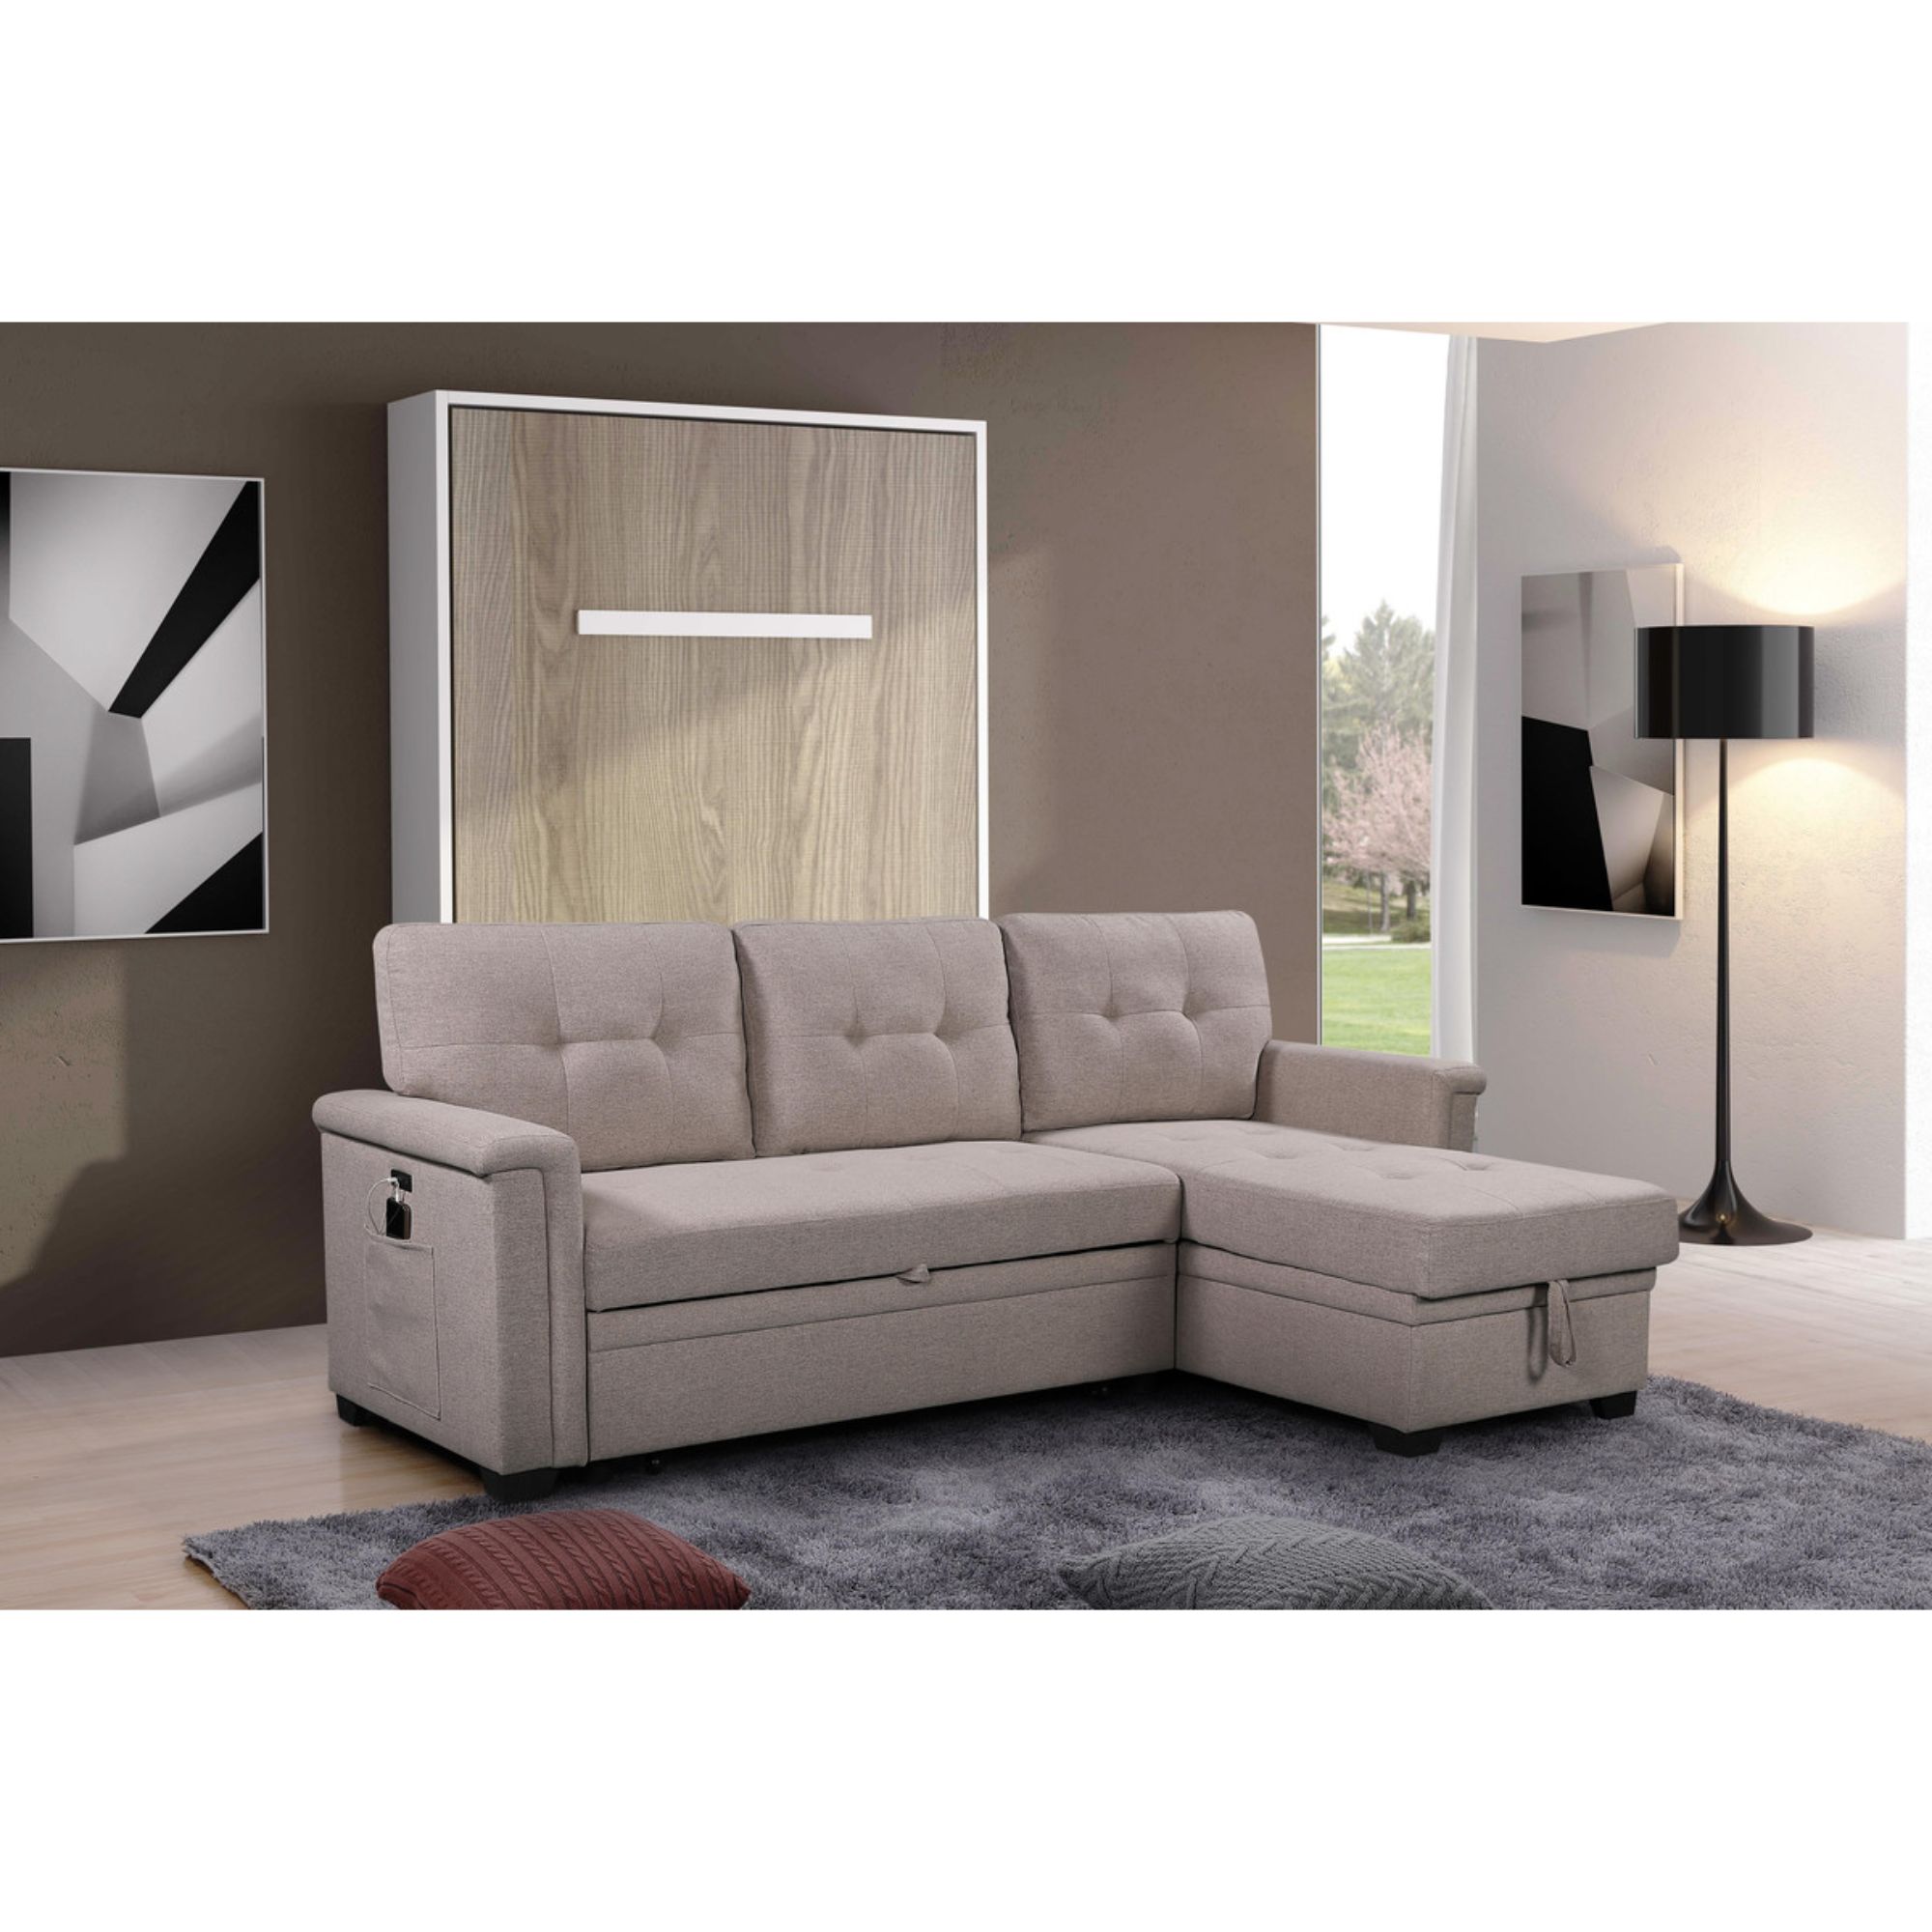 Contemporary Home Living 86 Ashlyn, Reversible Sleeper Sectional Sofa With Storage Chaise